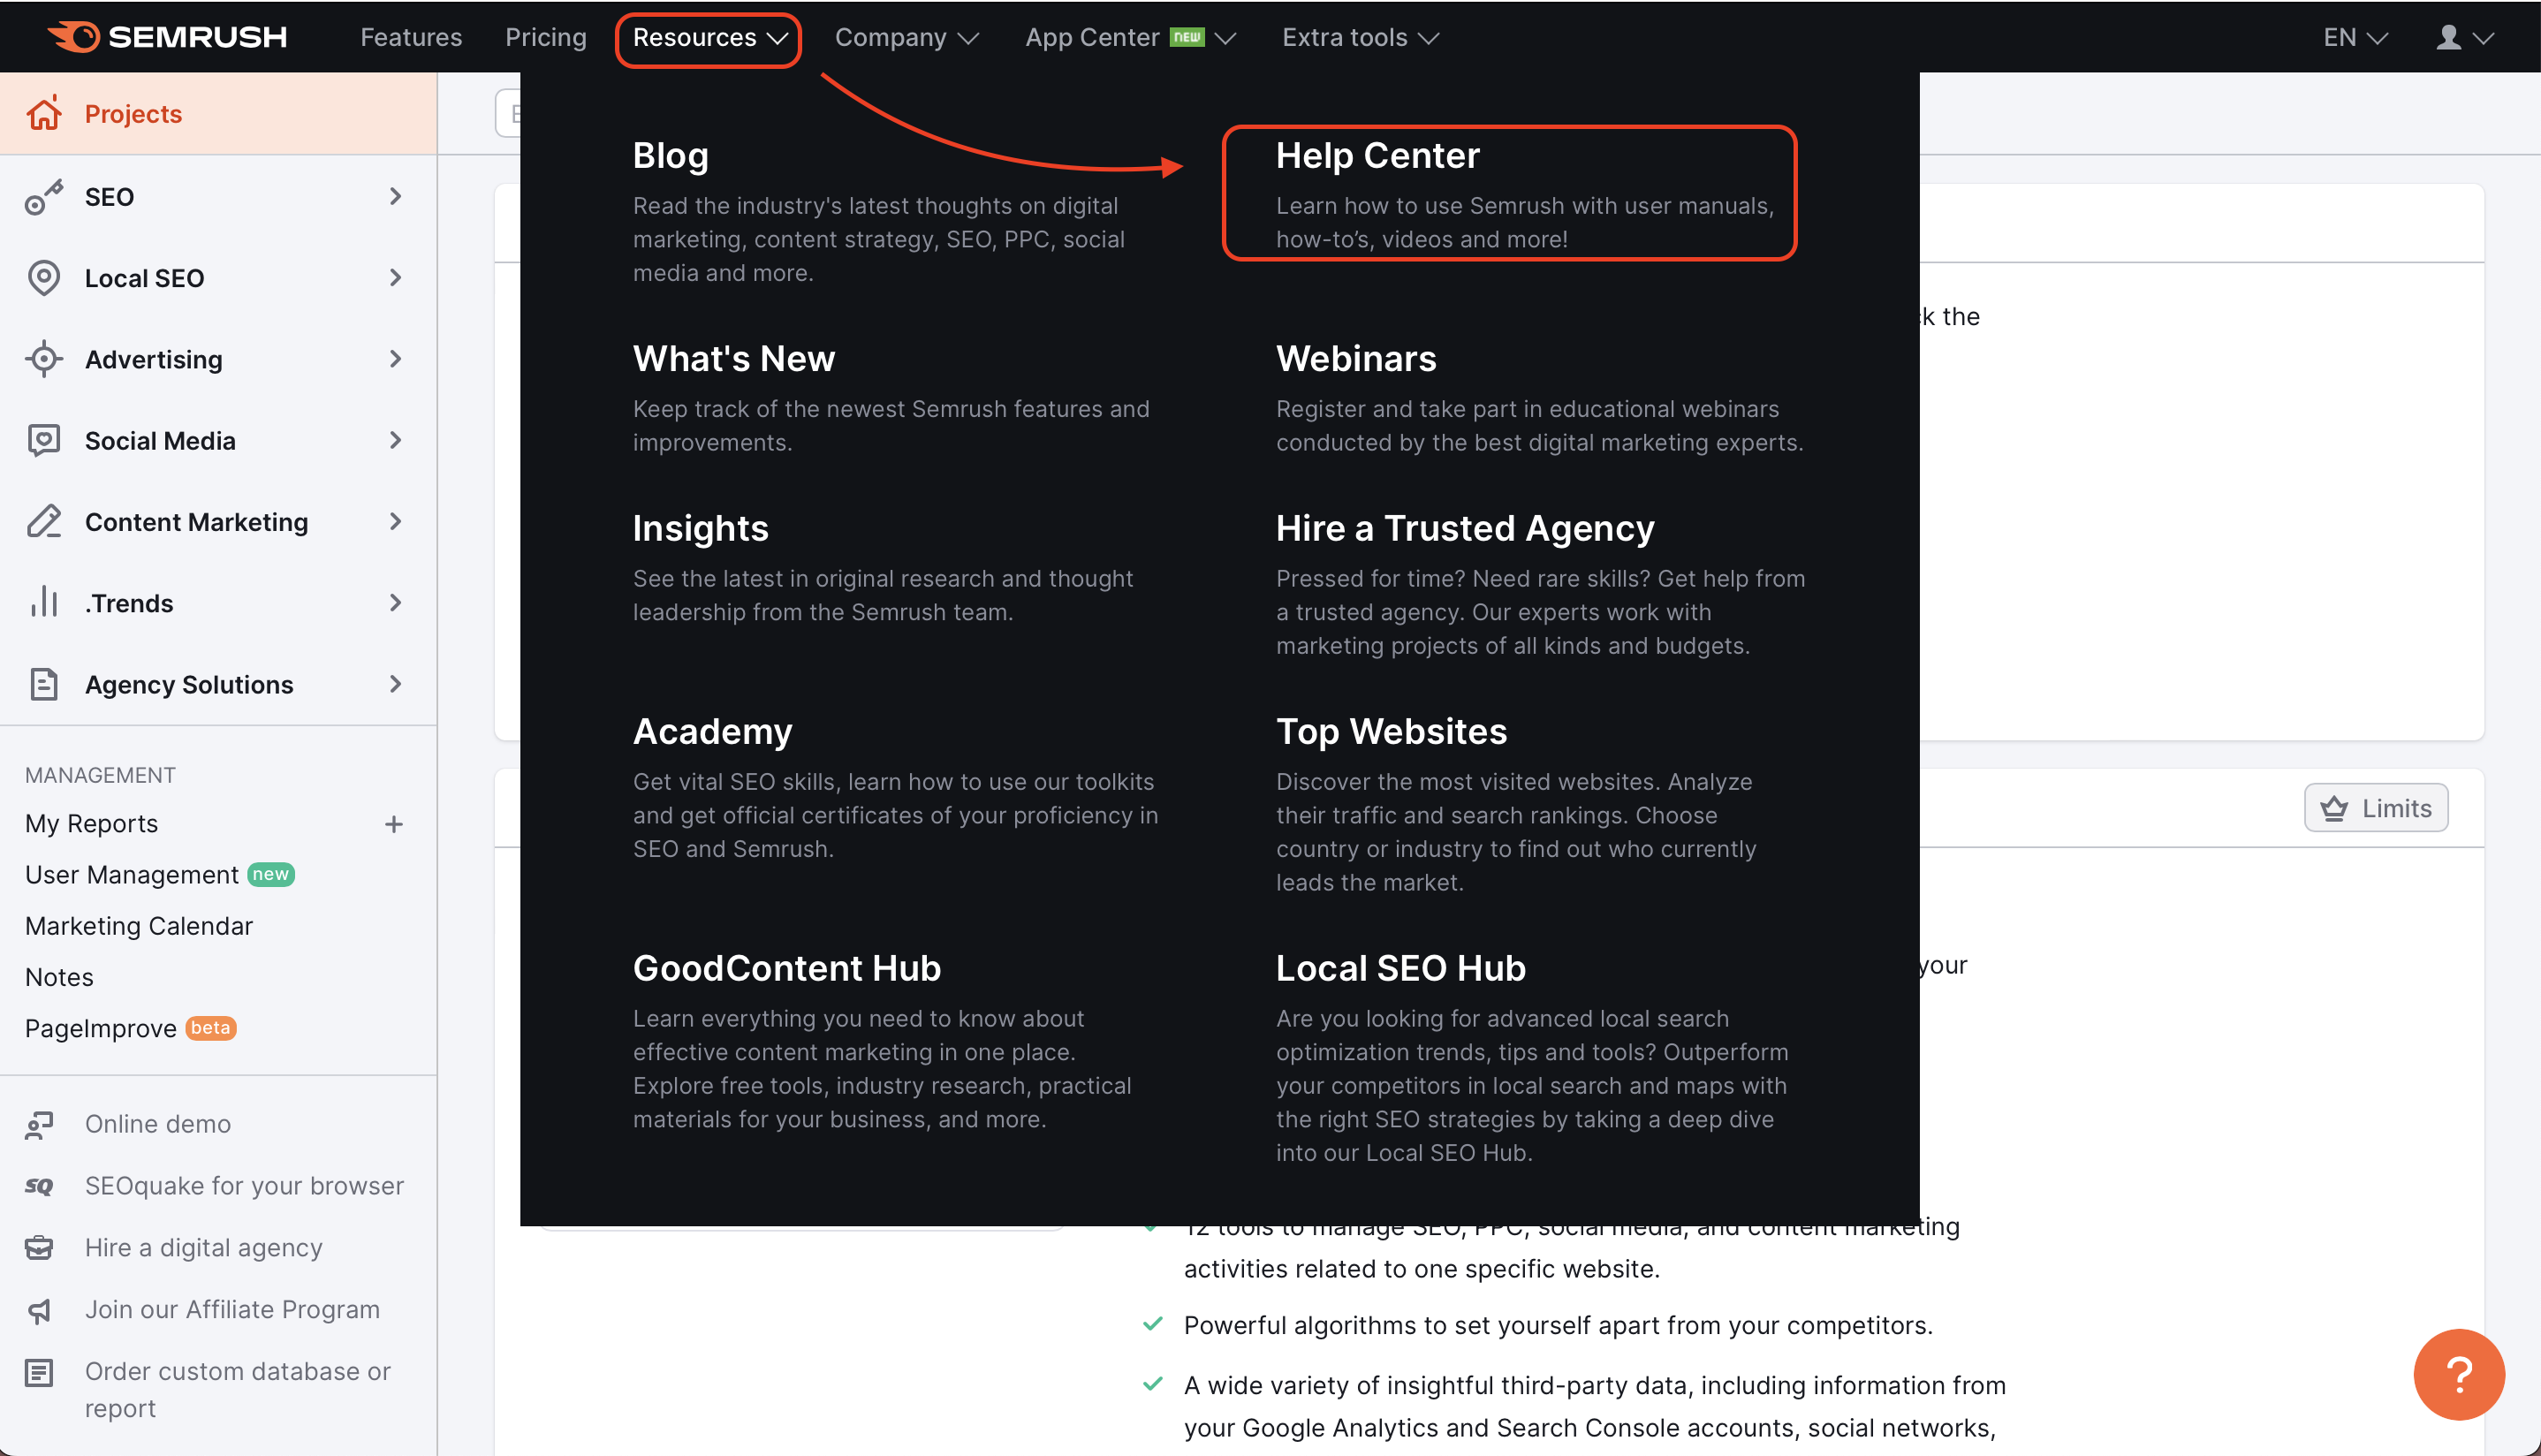 This screenshot shows how to navigate to Help Center via 'Resources' at top of the page.